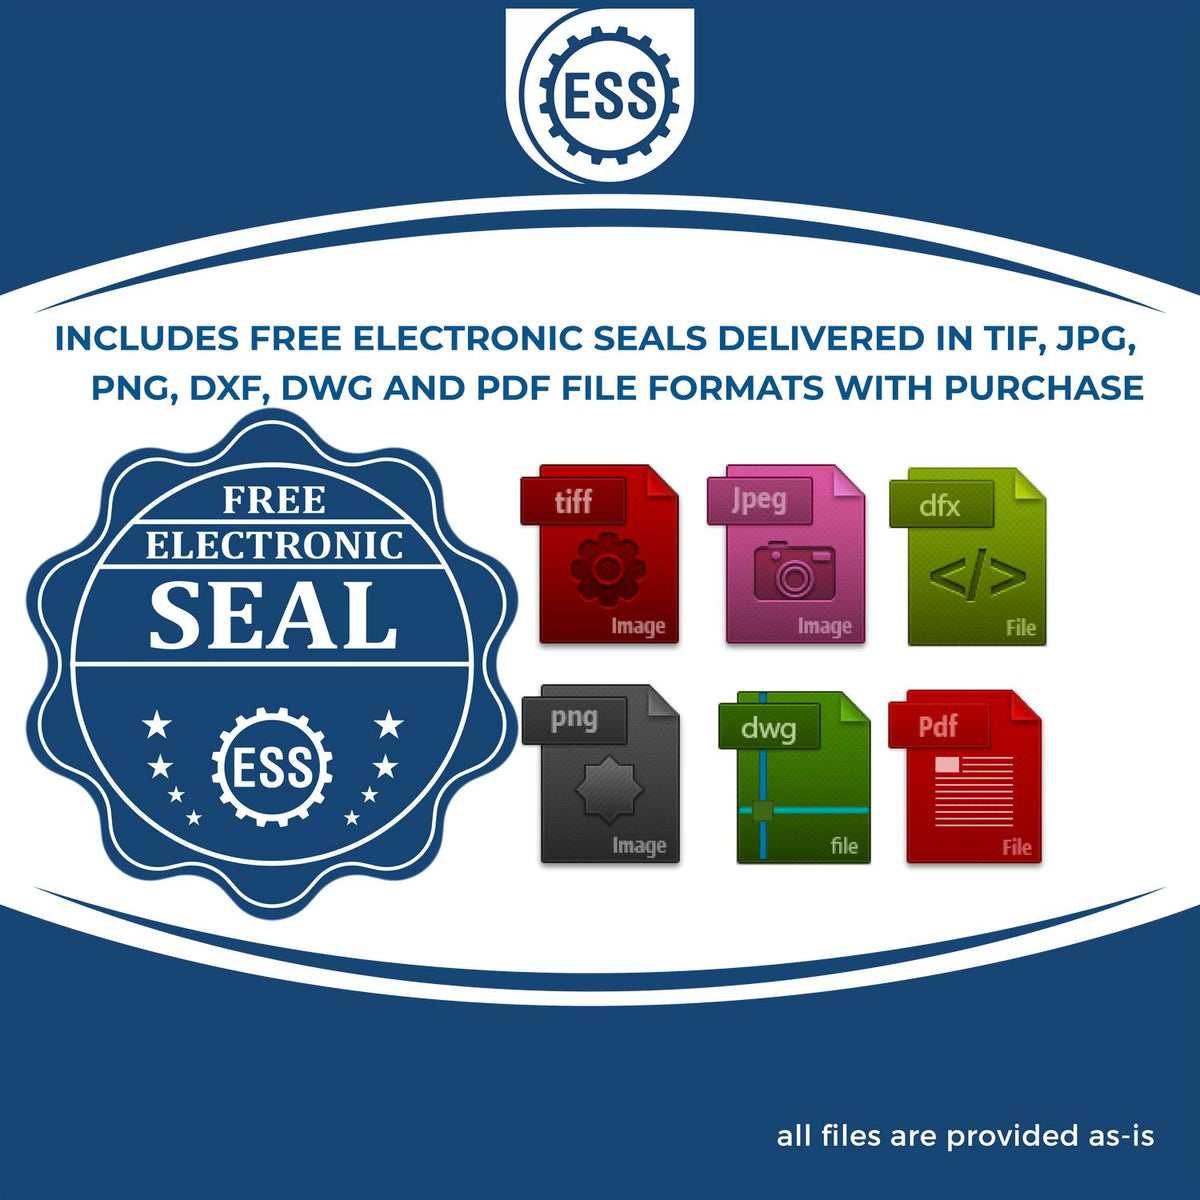 An infographic for the free electronic seal for the Colorado Professional Geologist Seal Stamp illustrating the different file type icons such as DXF, DWG, TIF, JPG and PNG.